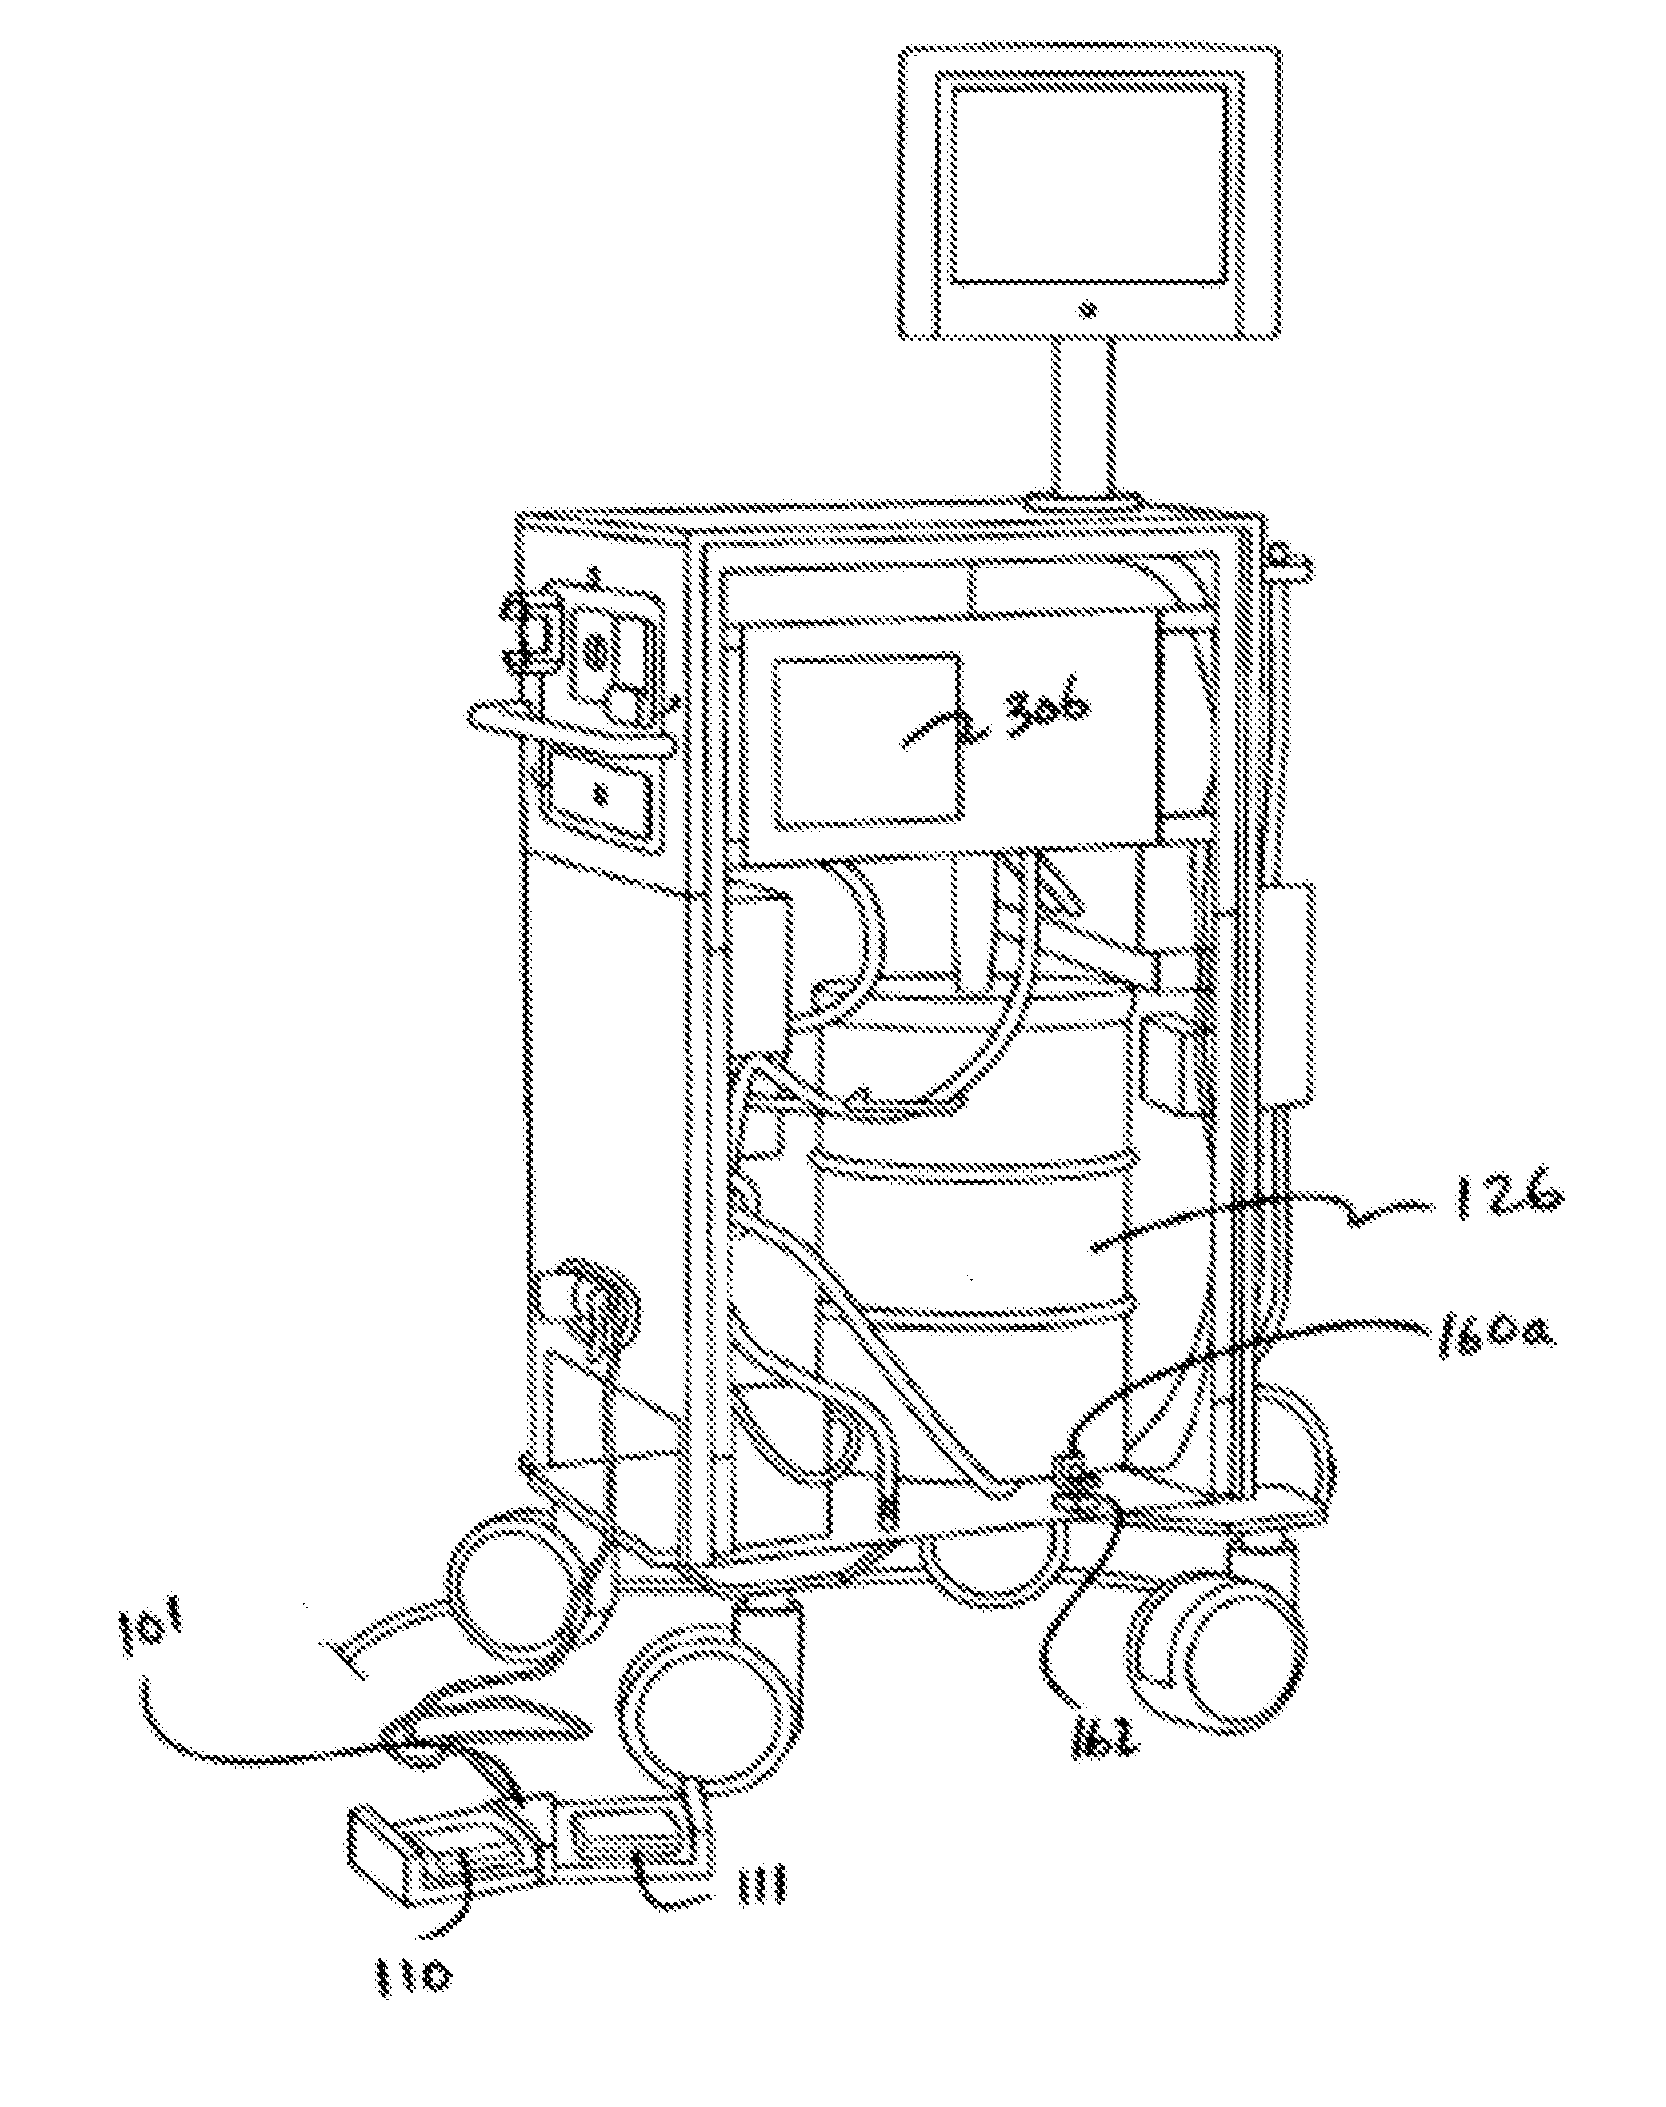 Method and system for consistent, repeatable, and safe cryospray treatment of airway tissue